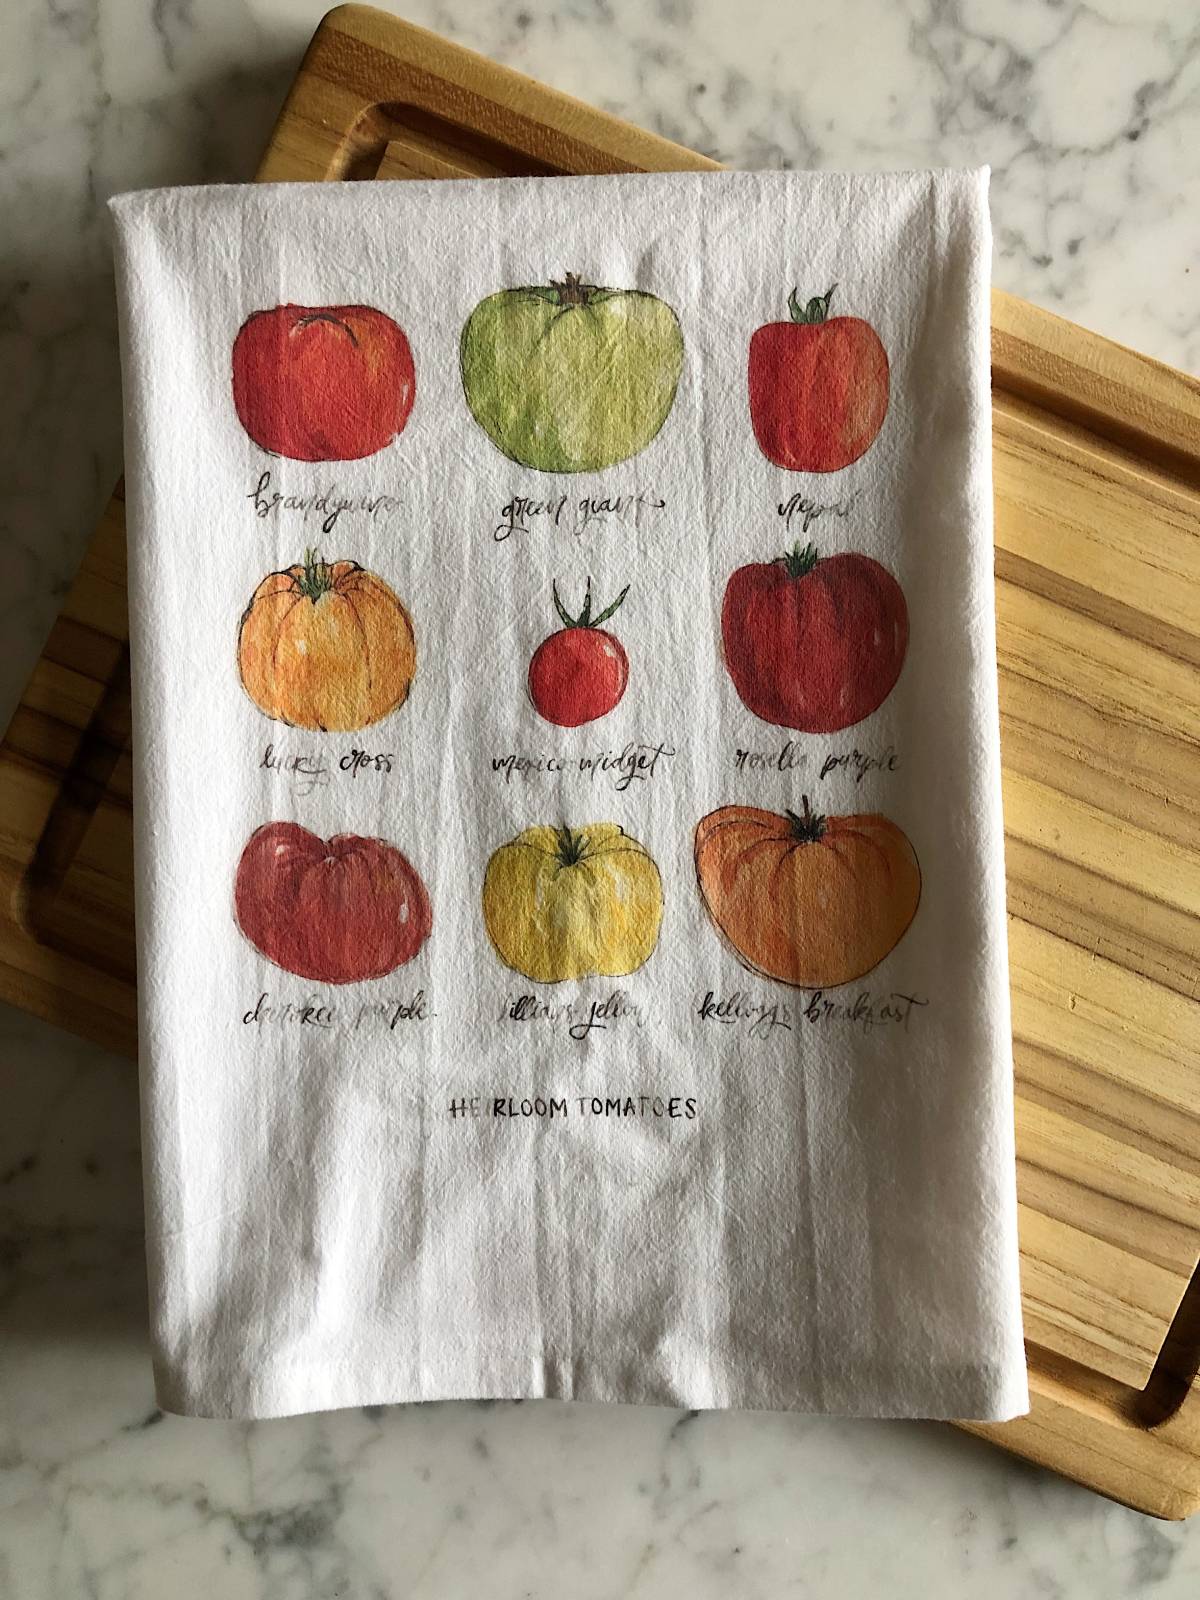 A white tea towel displaying watercolor illustrations of 9 heirloom tomatoes